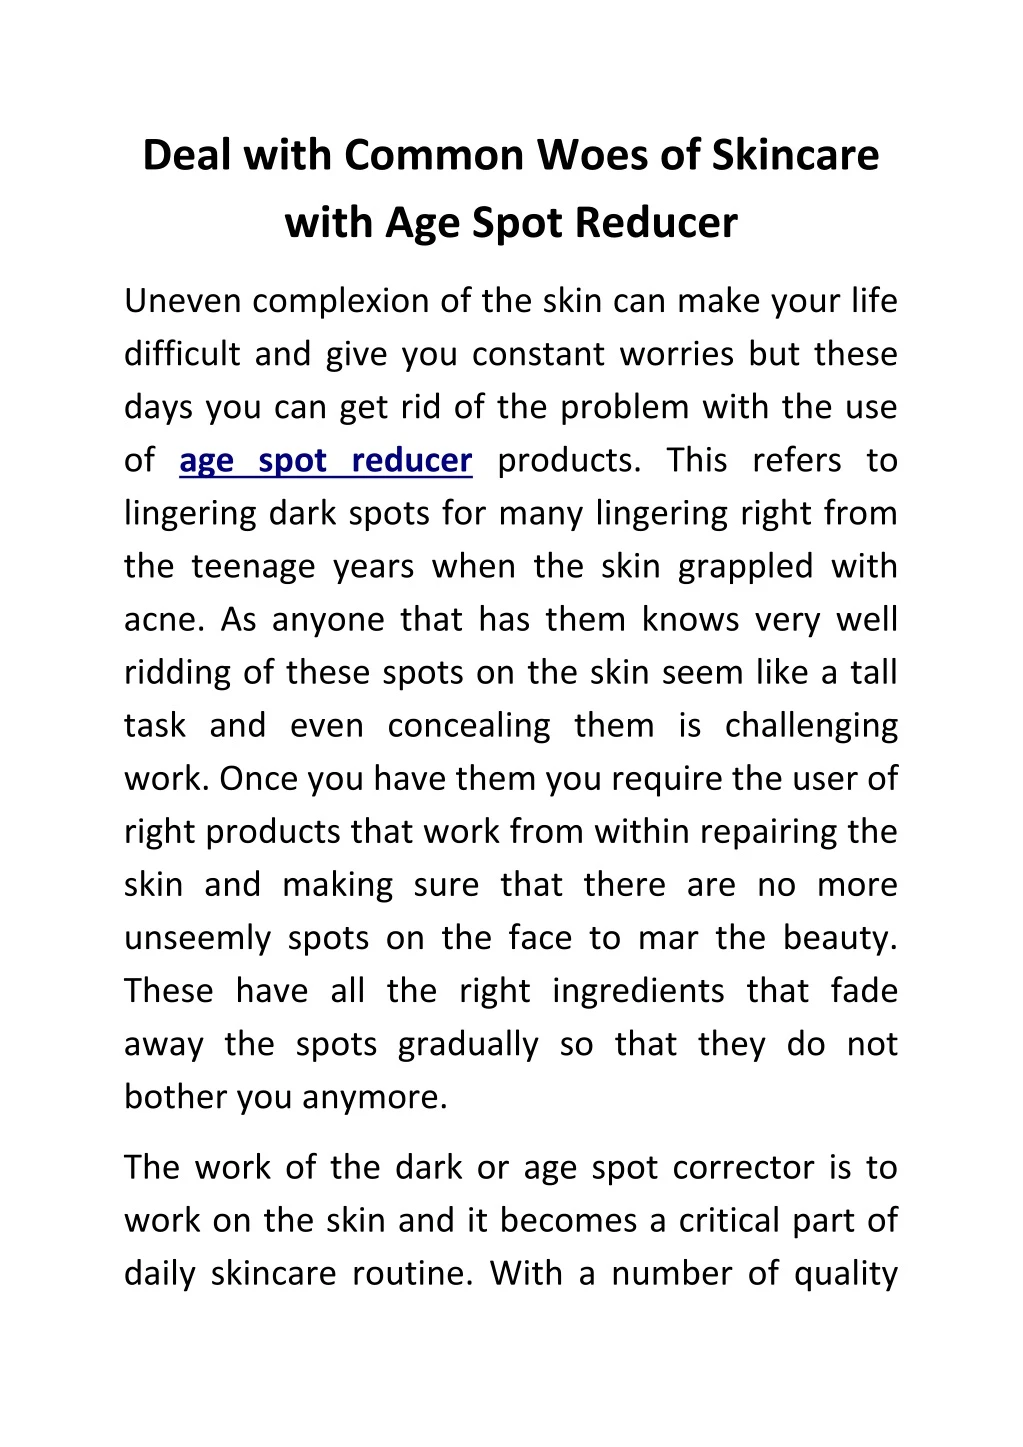 deal with common woes of skincare with age spot